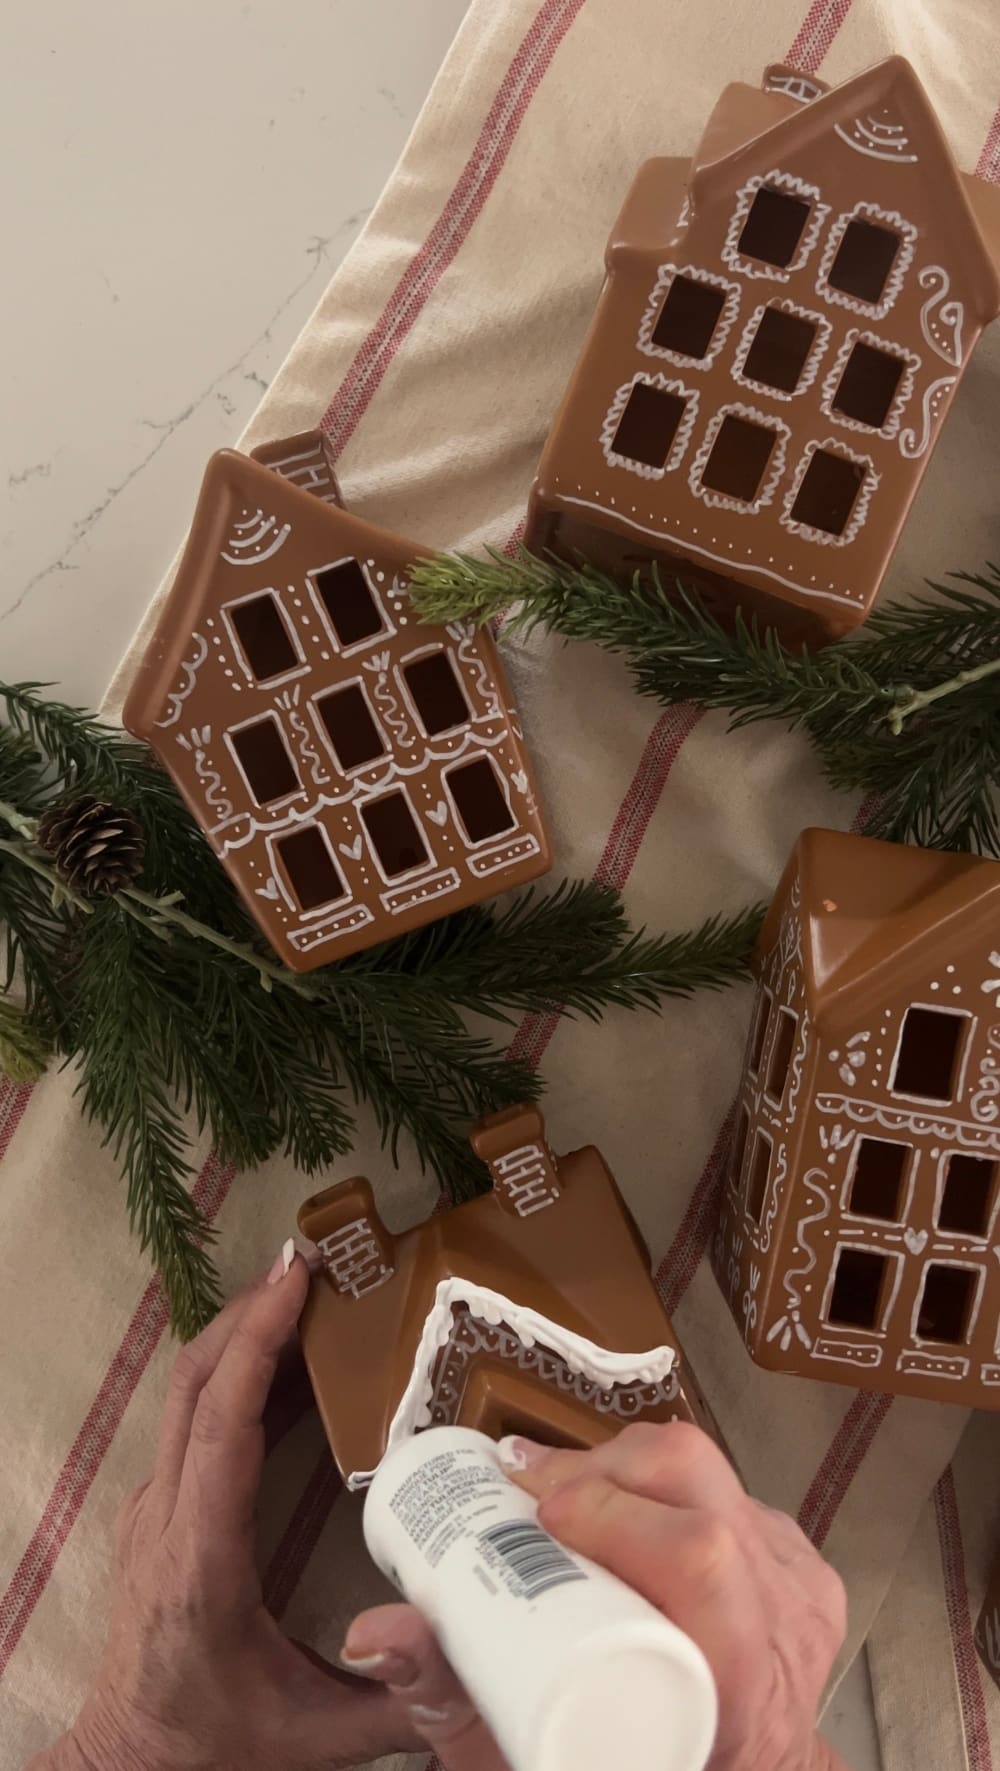 Turn a Ceramic Village into a Gingerbread Village. Revamp a plain ceramic Christmas village into a festive delight using spray paint, a white paint pen, and puffy paint. 